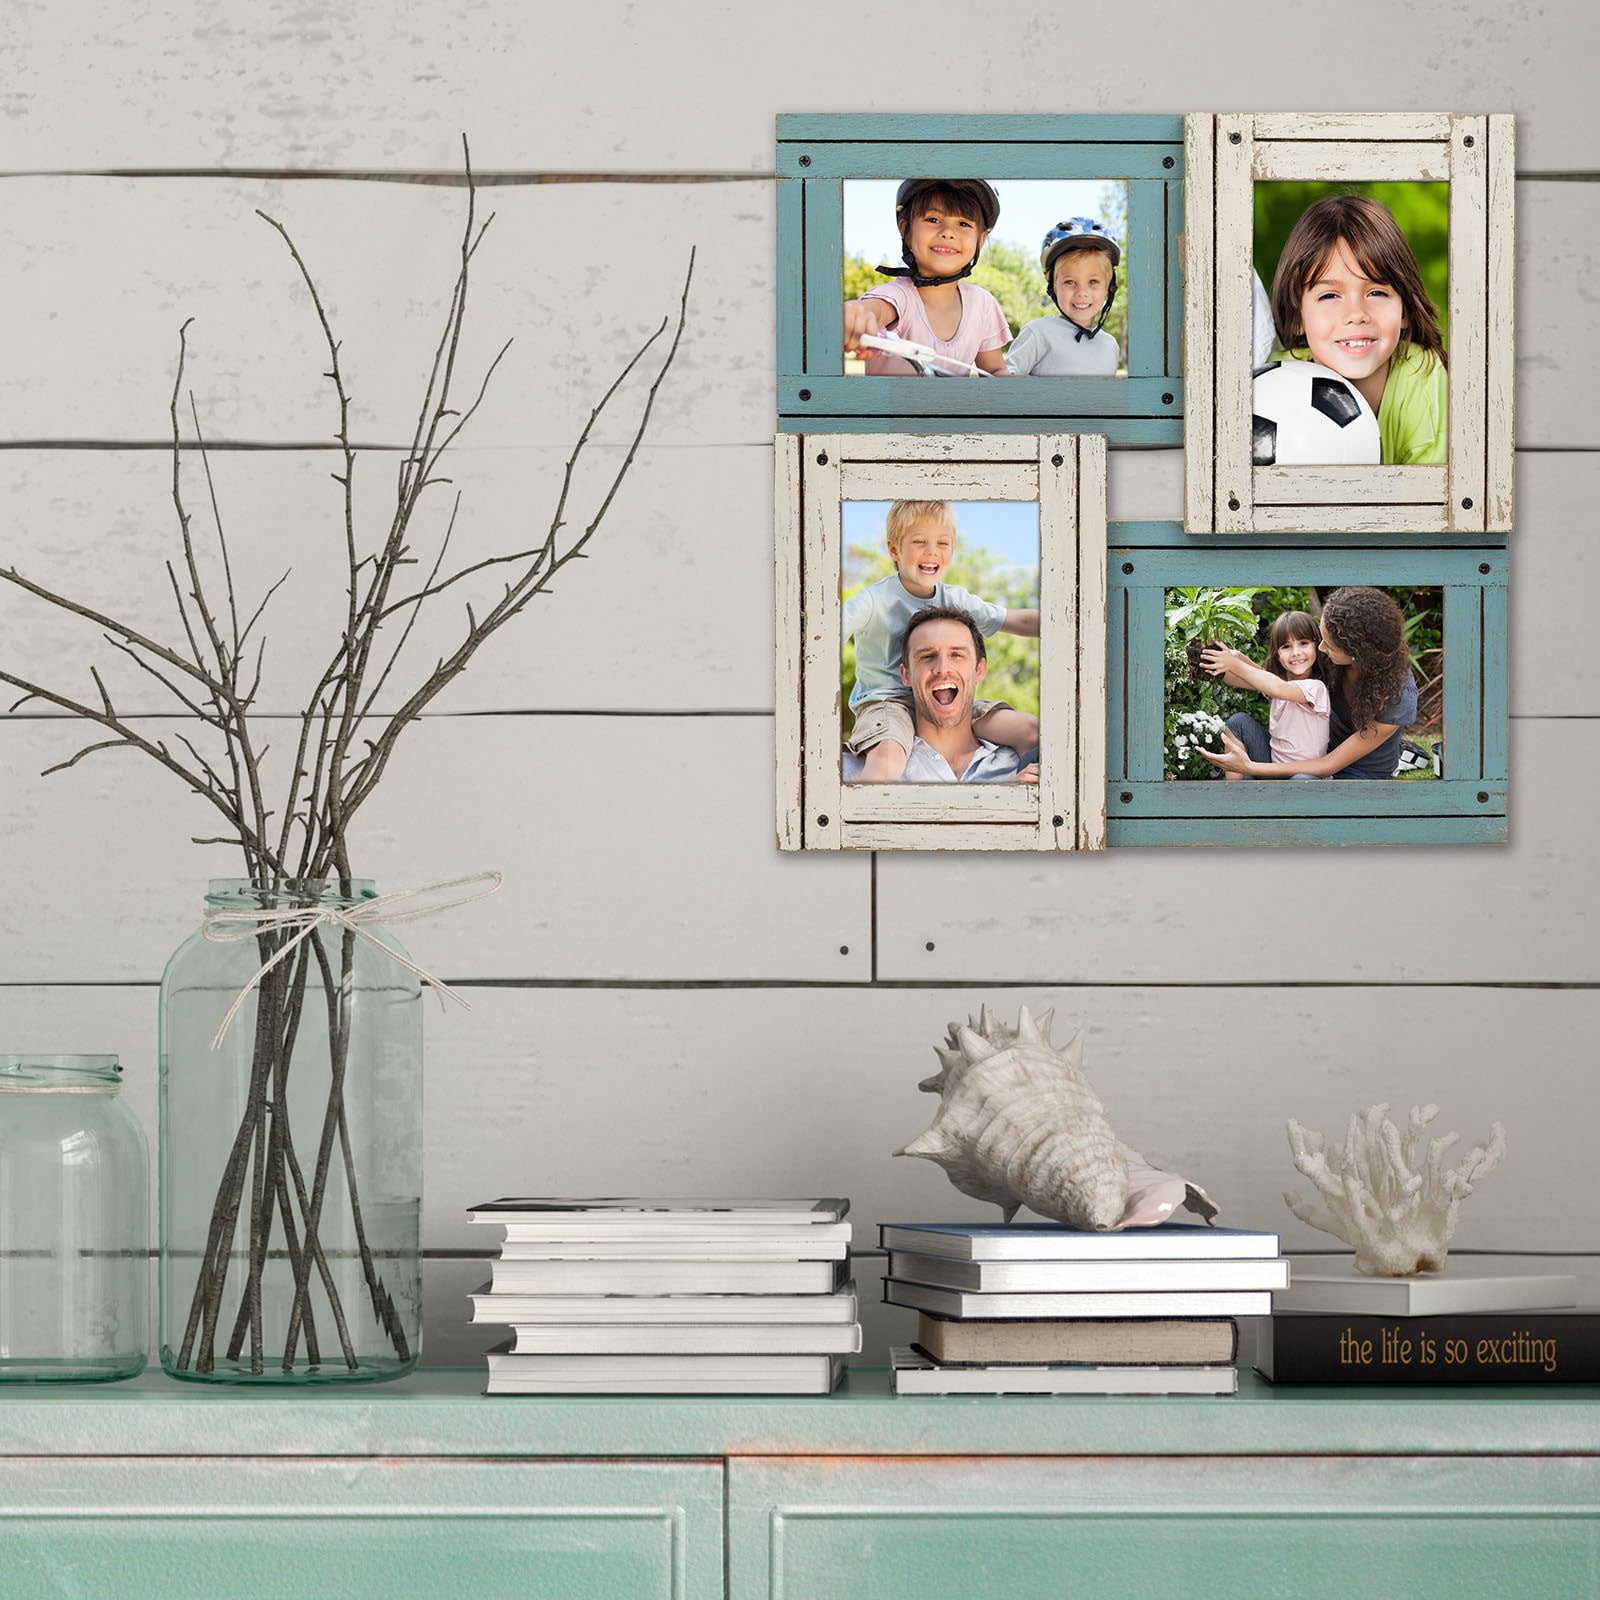 Excello Global Products Collage Picture Frames from Rustic Distressed Wood: Holds Five 4x6 Photos - EGP-HD-0024